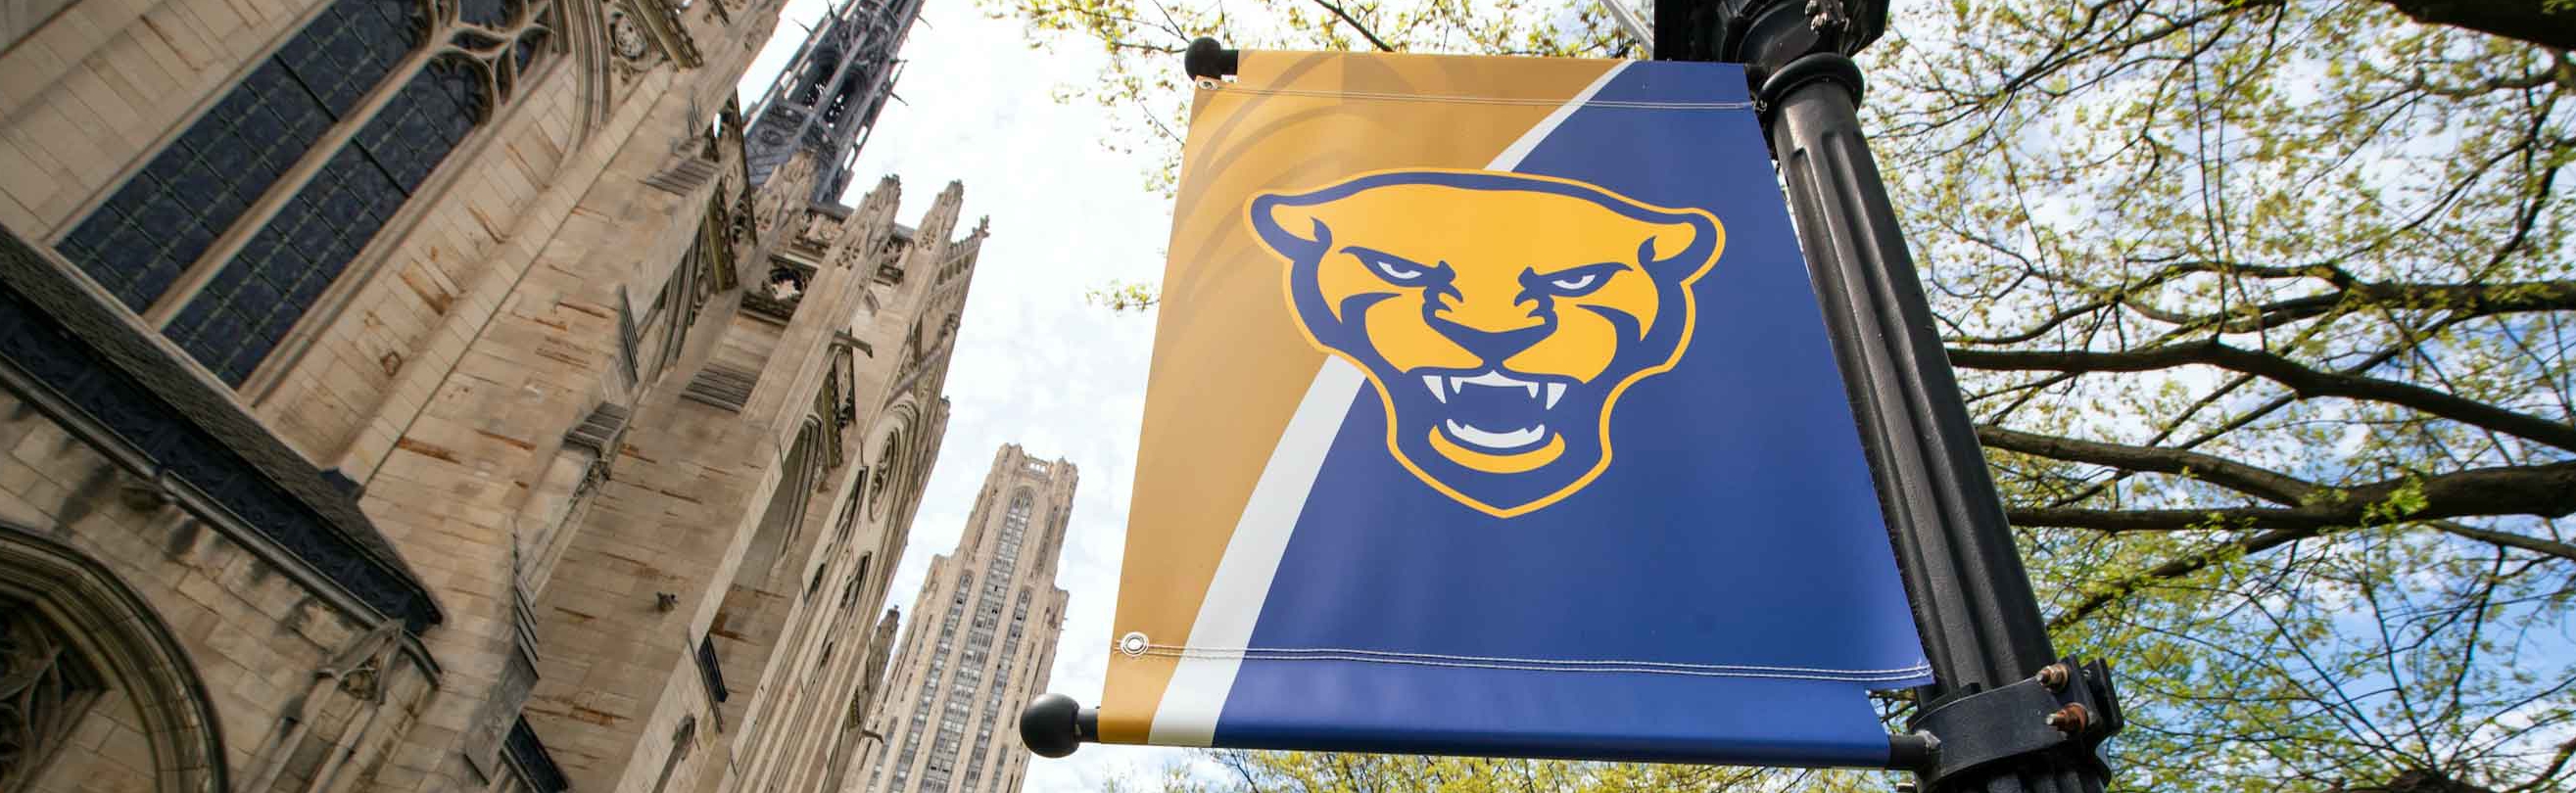 Pitt panther flag in front of cathedral